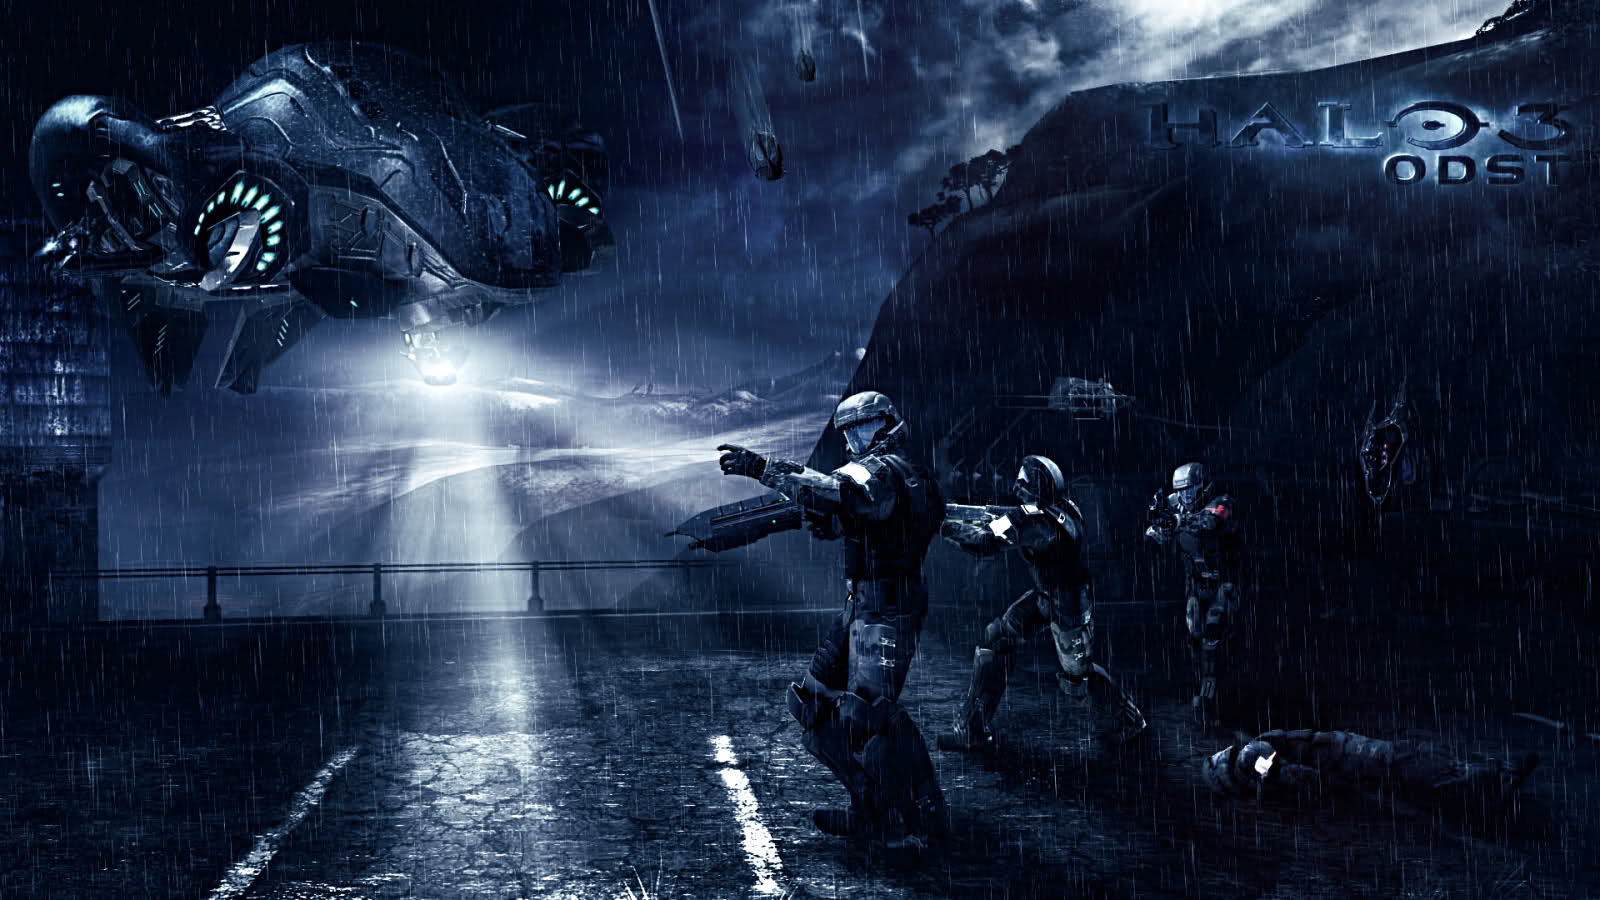 Halo Odst Game Wallpaper High Definition HD Games